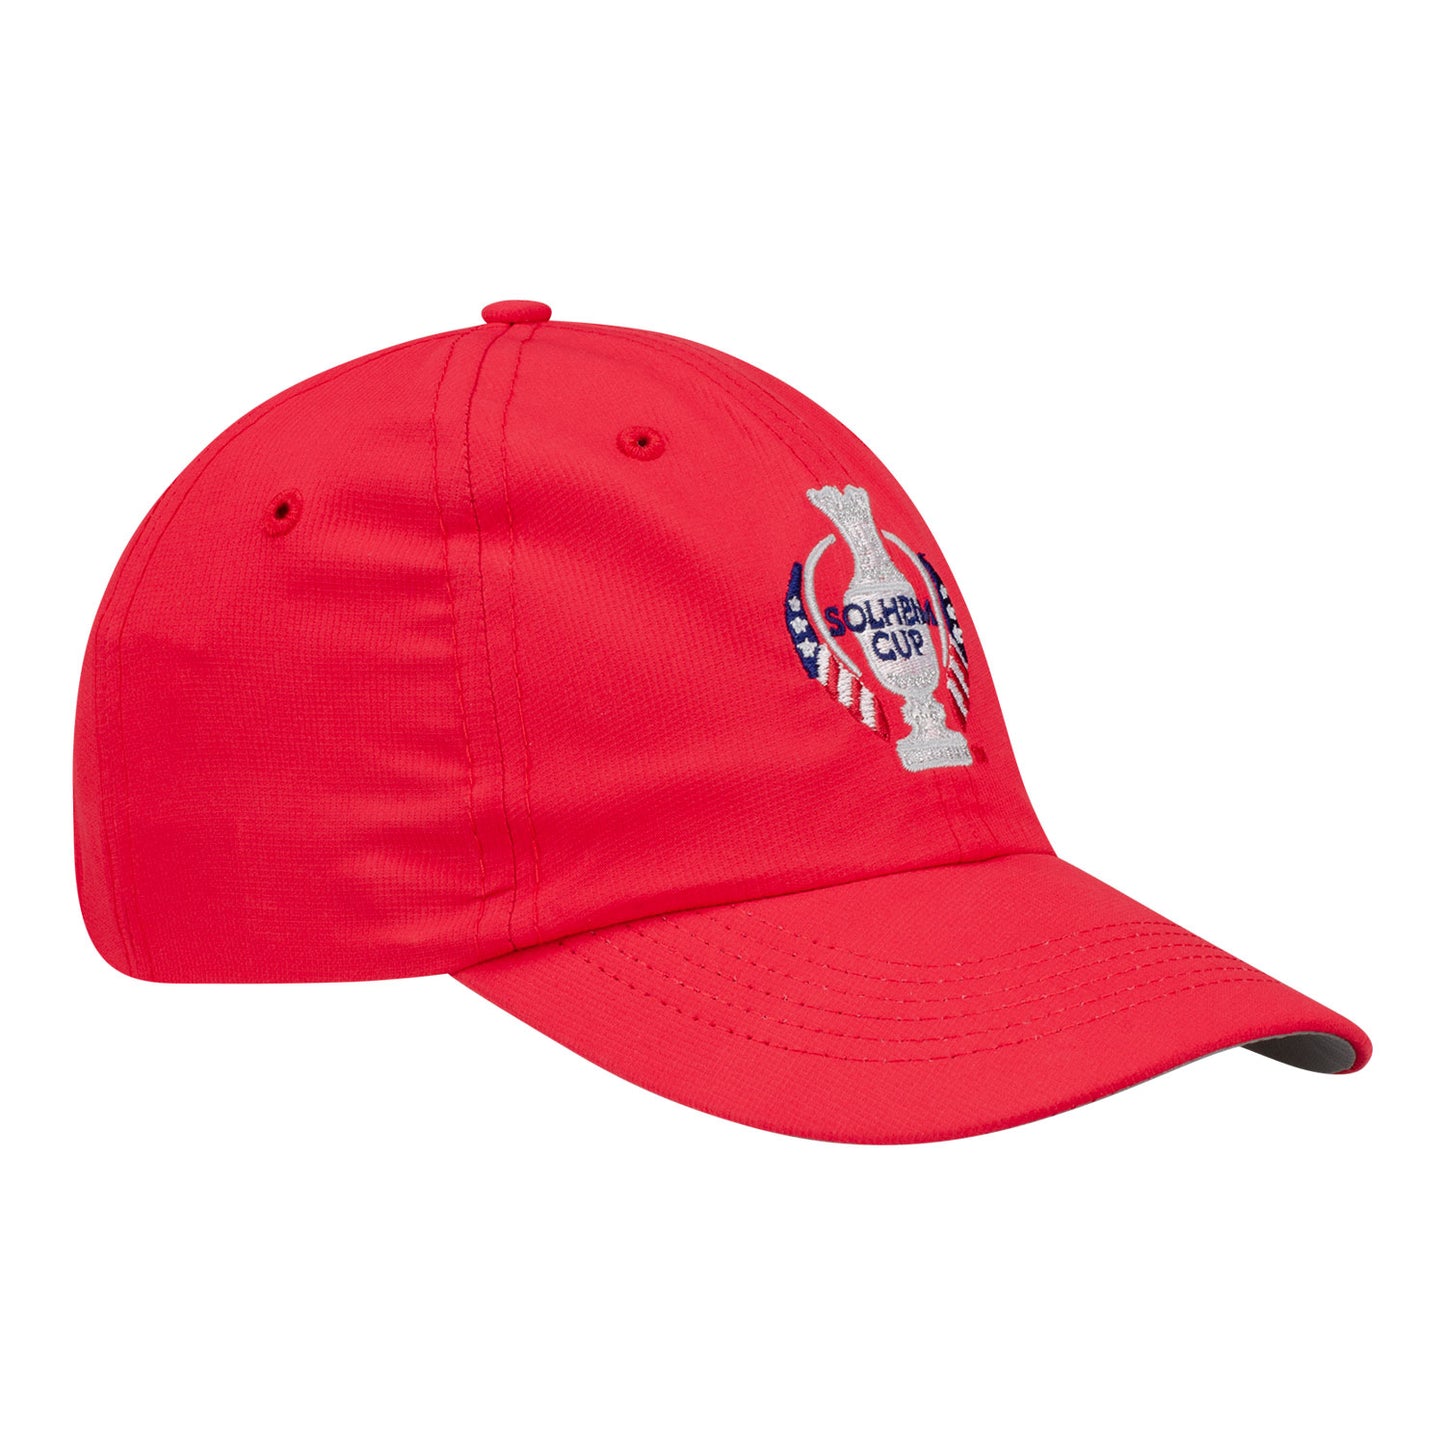 Imperial LPGA Official Solheim Cup Fan Wear in Red - Angled Right Side View